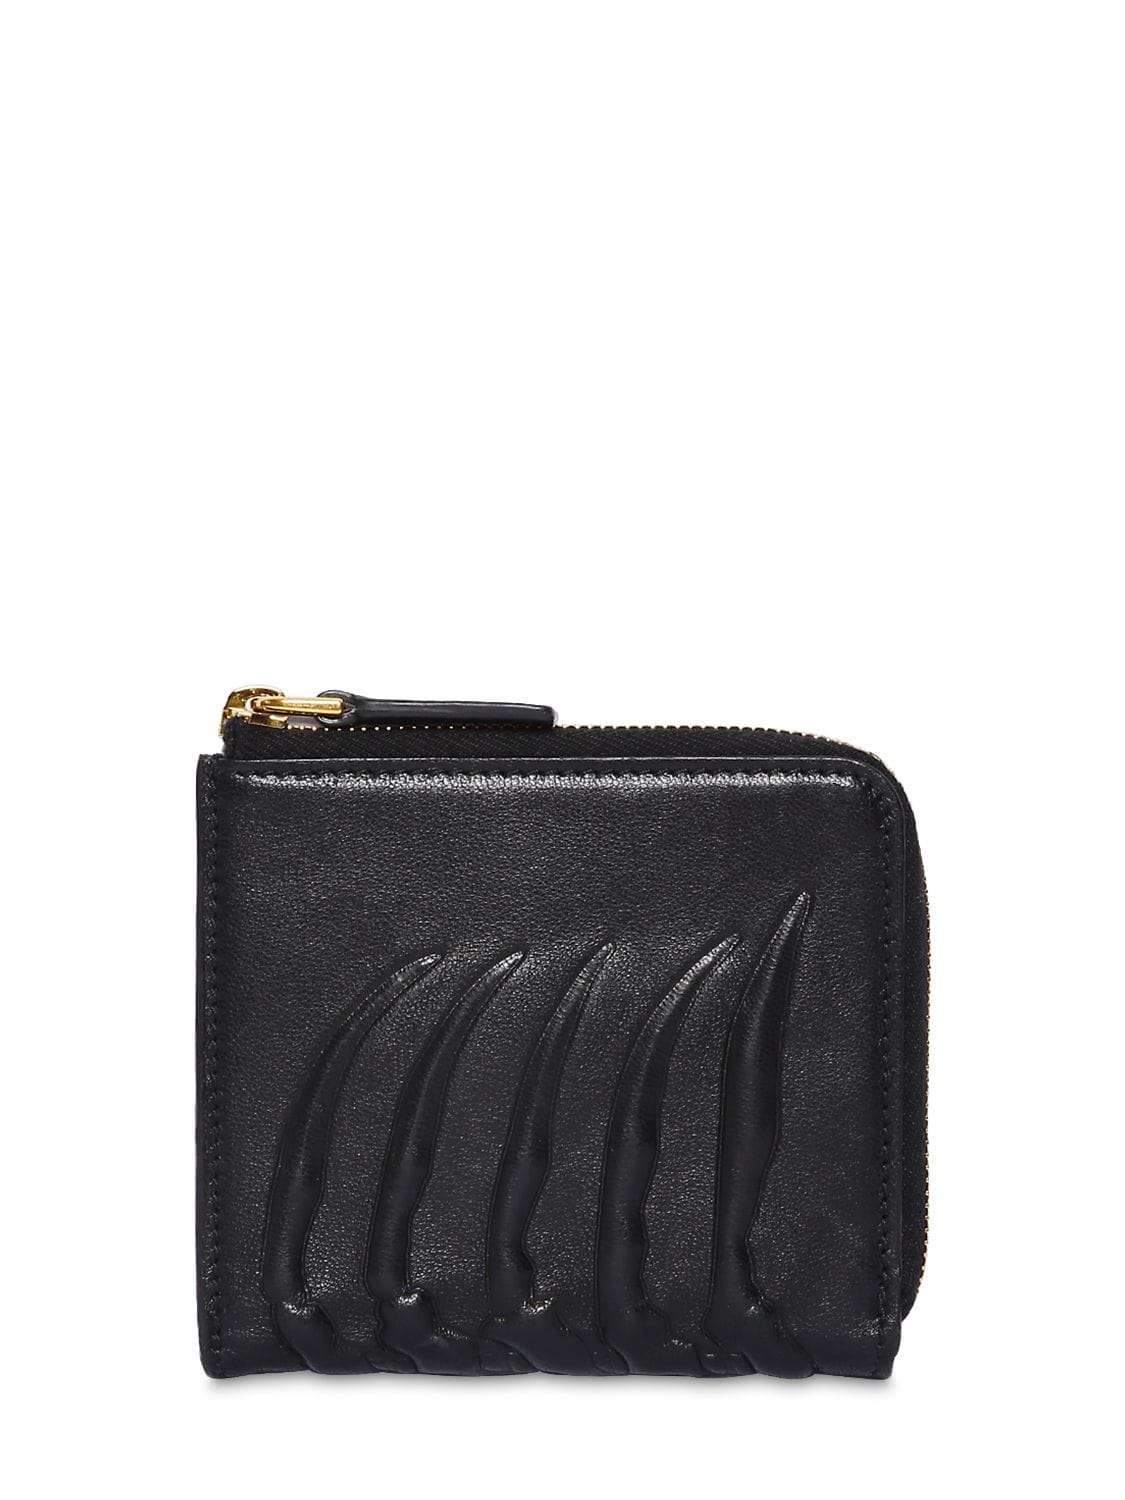 ALEXANDER MCQUEEN RIB CAGE LEATHER COIN WALLET W/ ZIP,70I1UP010-MTAWMA2